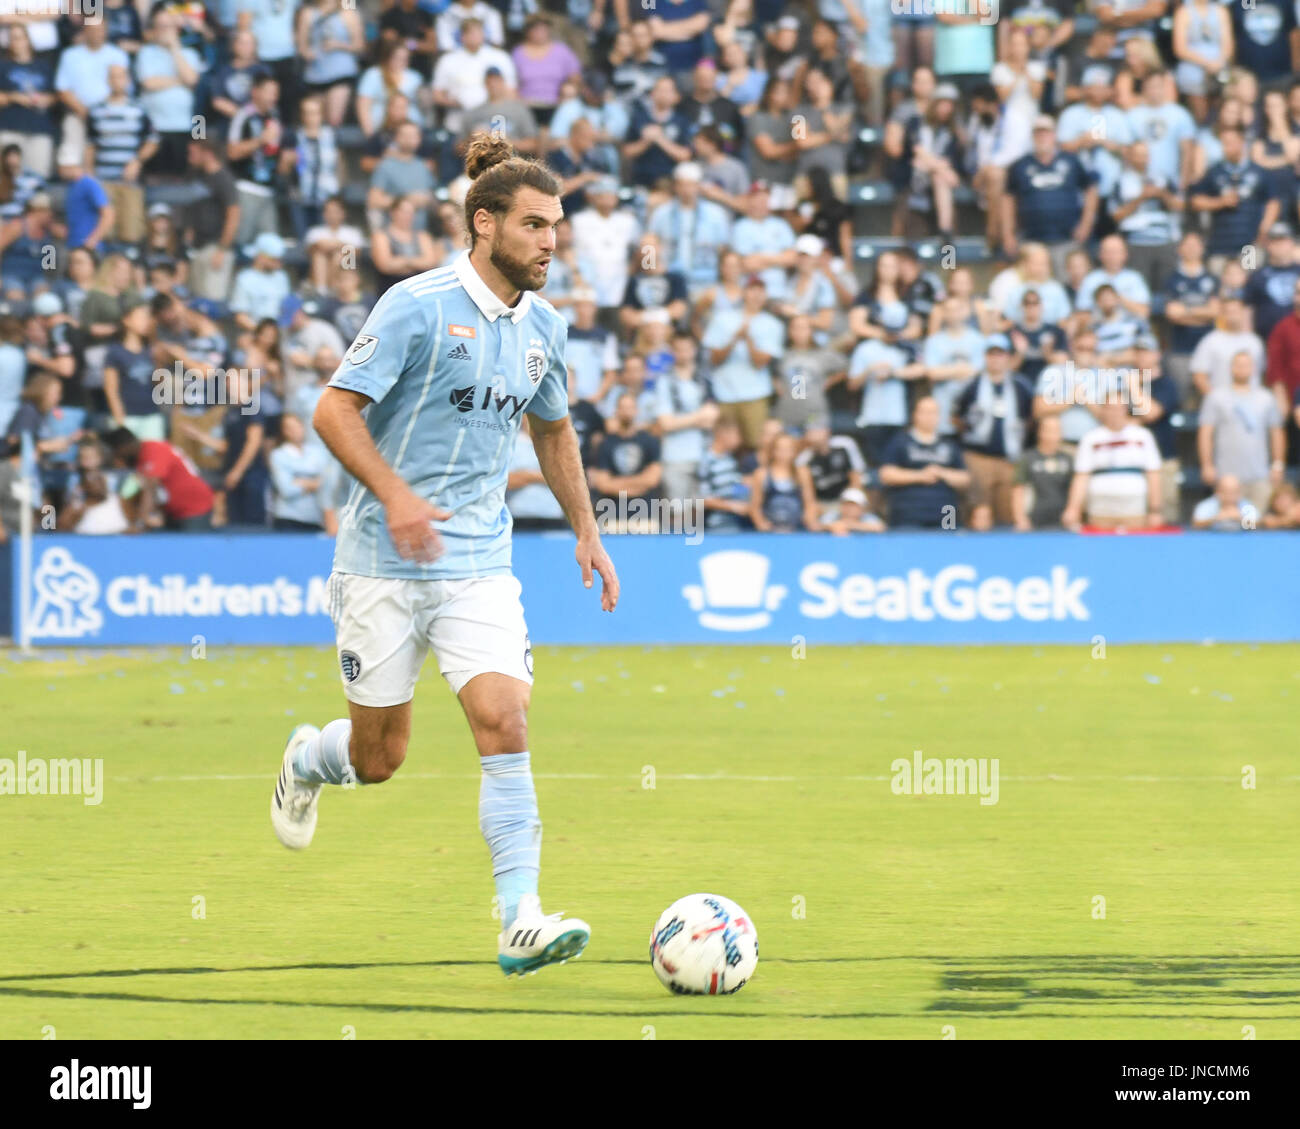 KANSAS CITY, KS - JULY 29: Sporting Kansas City midfielder Graham Zusi (8) in the first half of an MLS match between the Chicago Fire and Sporting KC Stock Photo